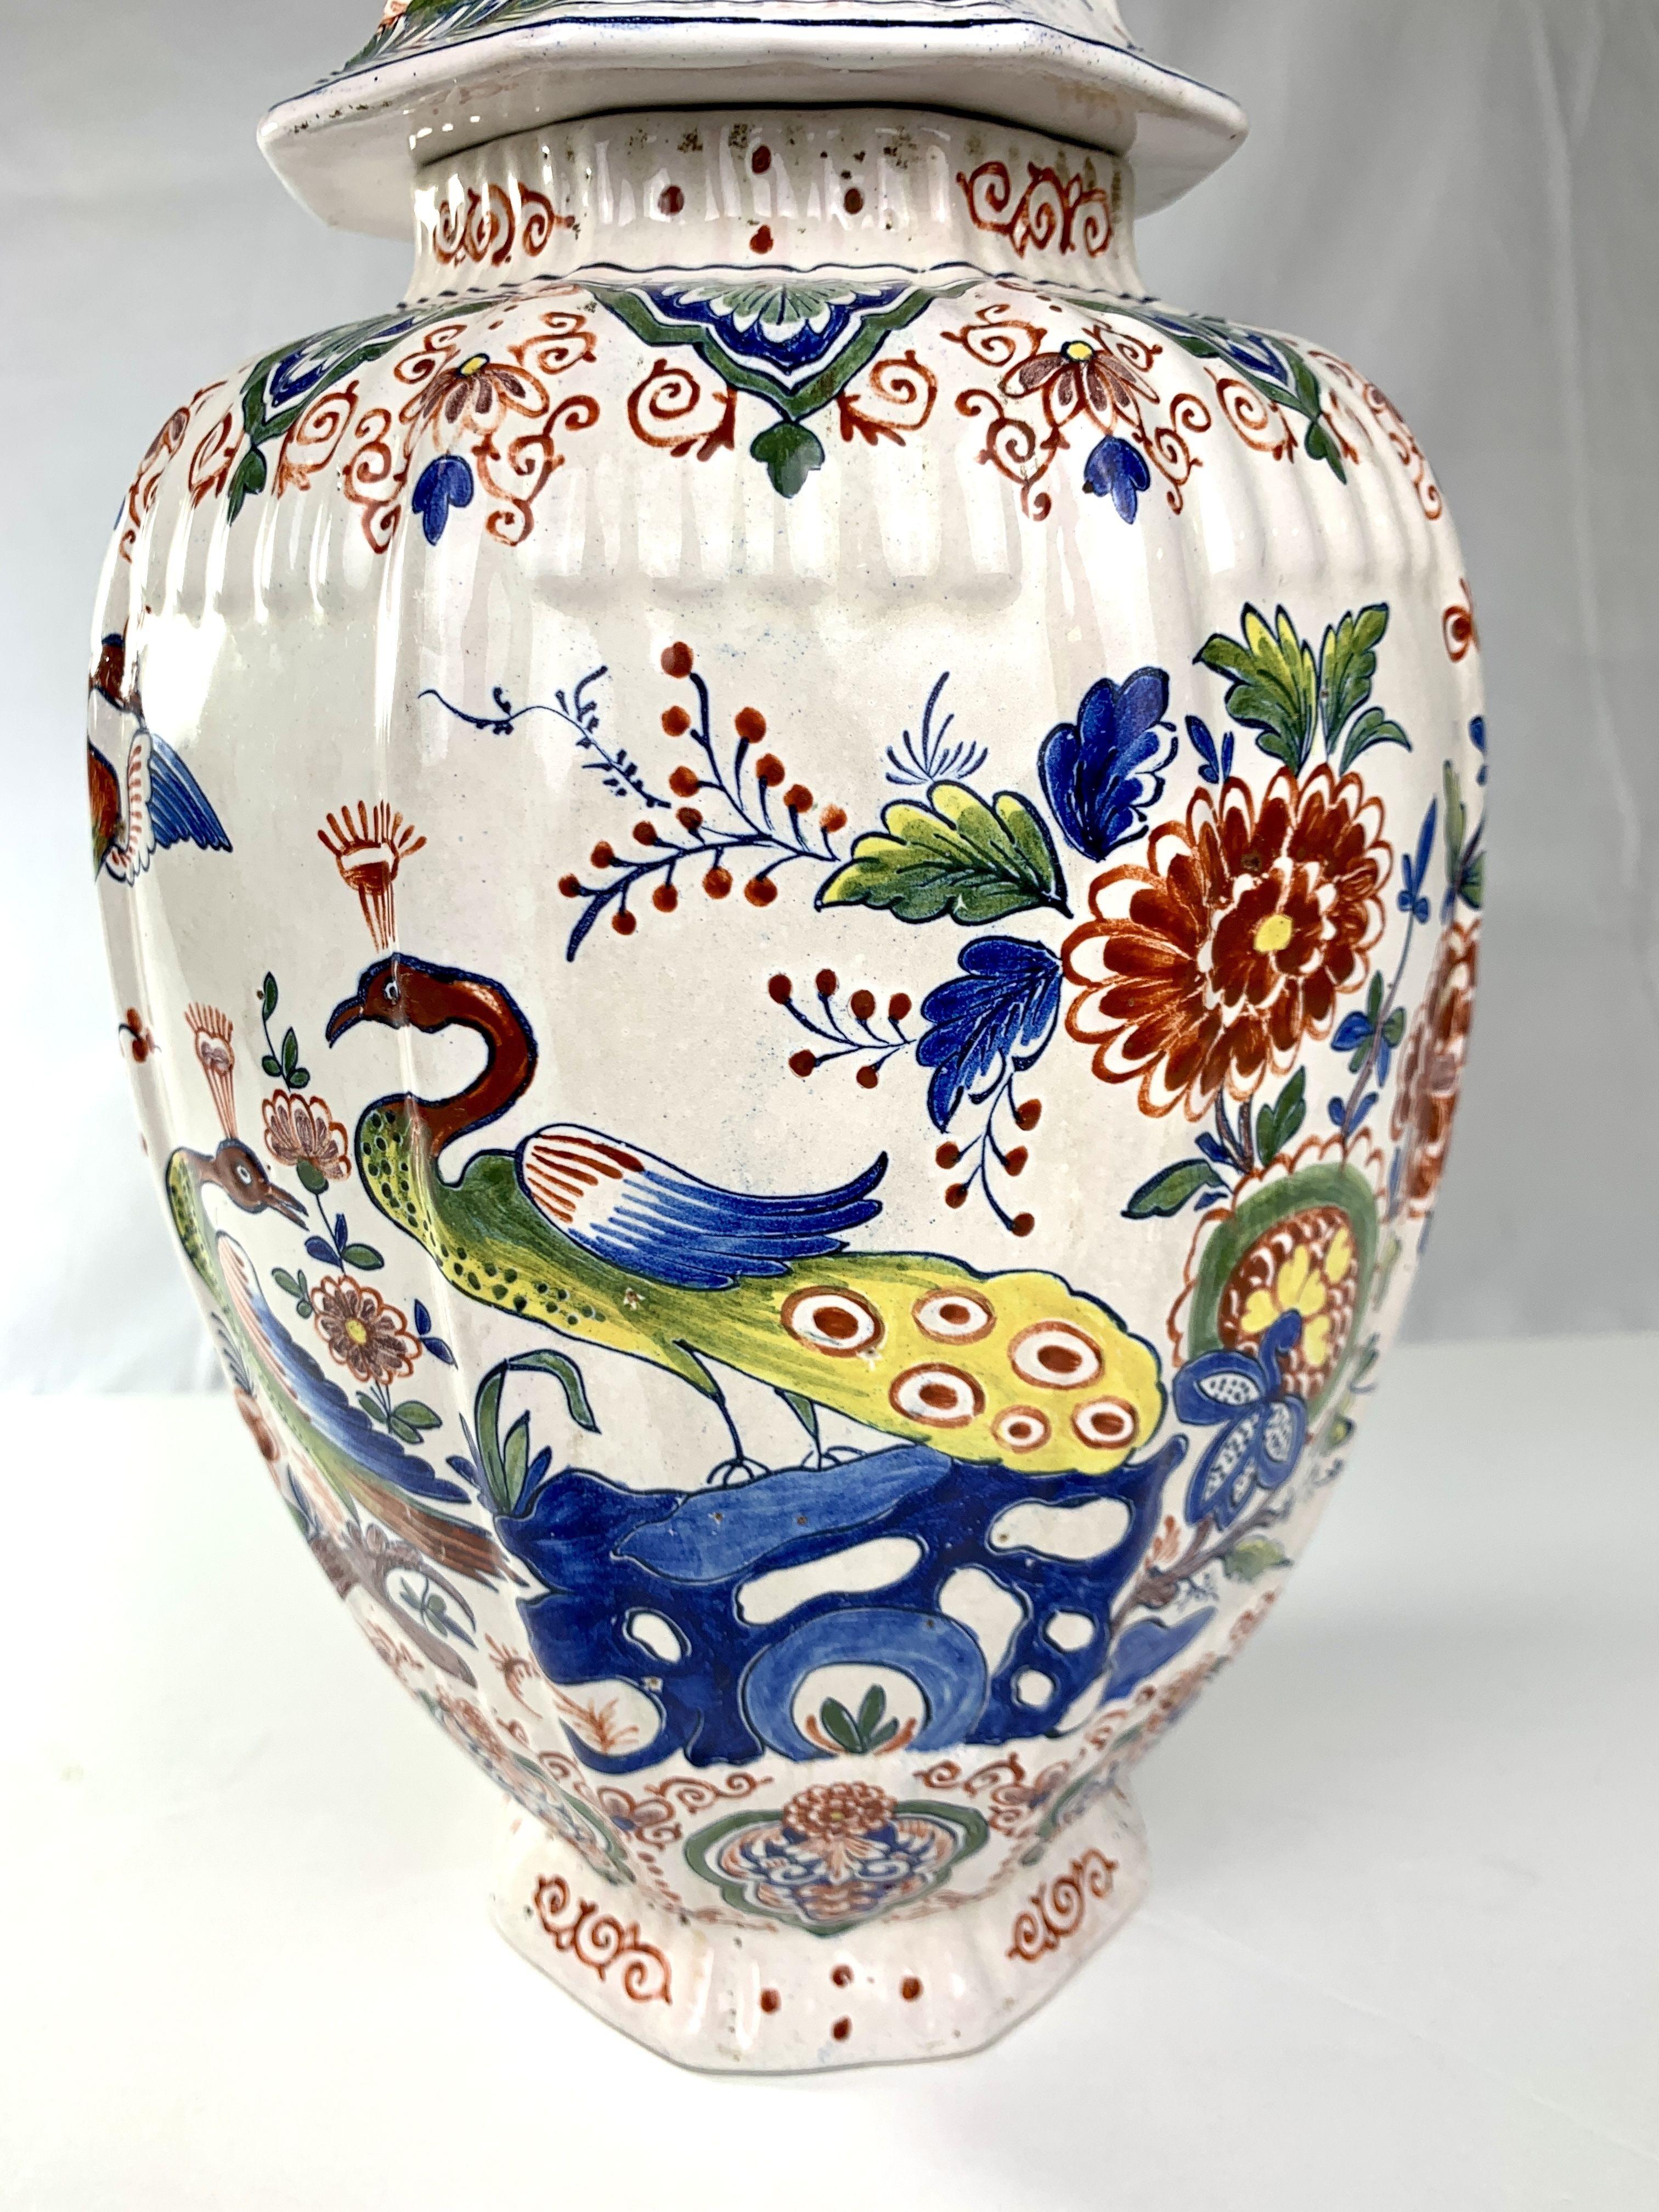 20th Century Dutch Delft Jar Hand-Painted in Traditional Polychrome Colors